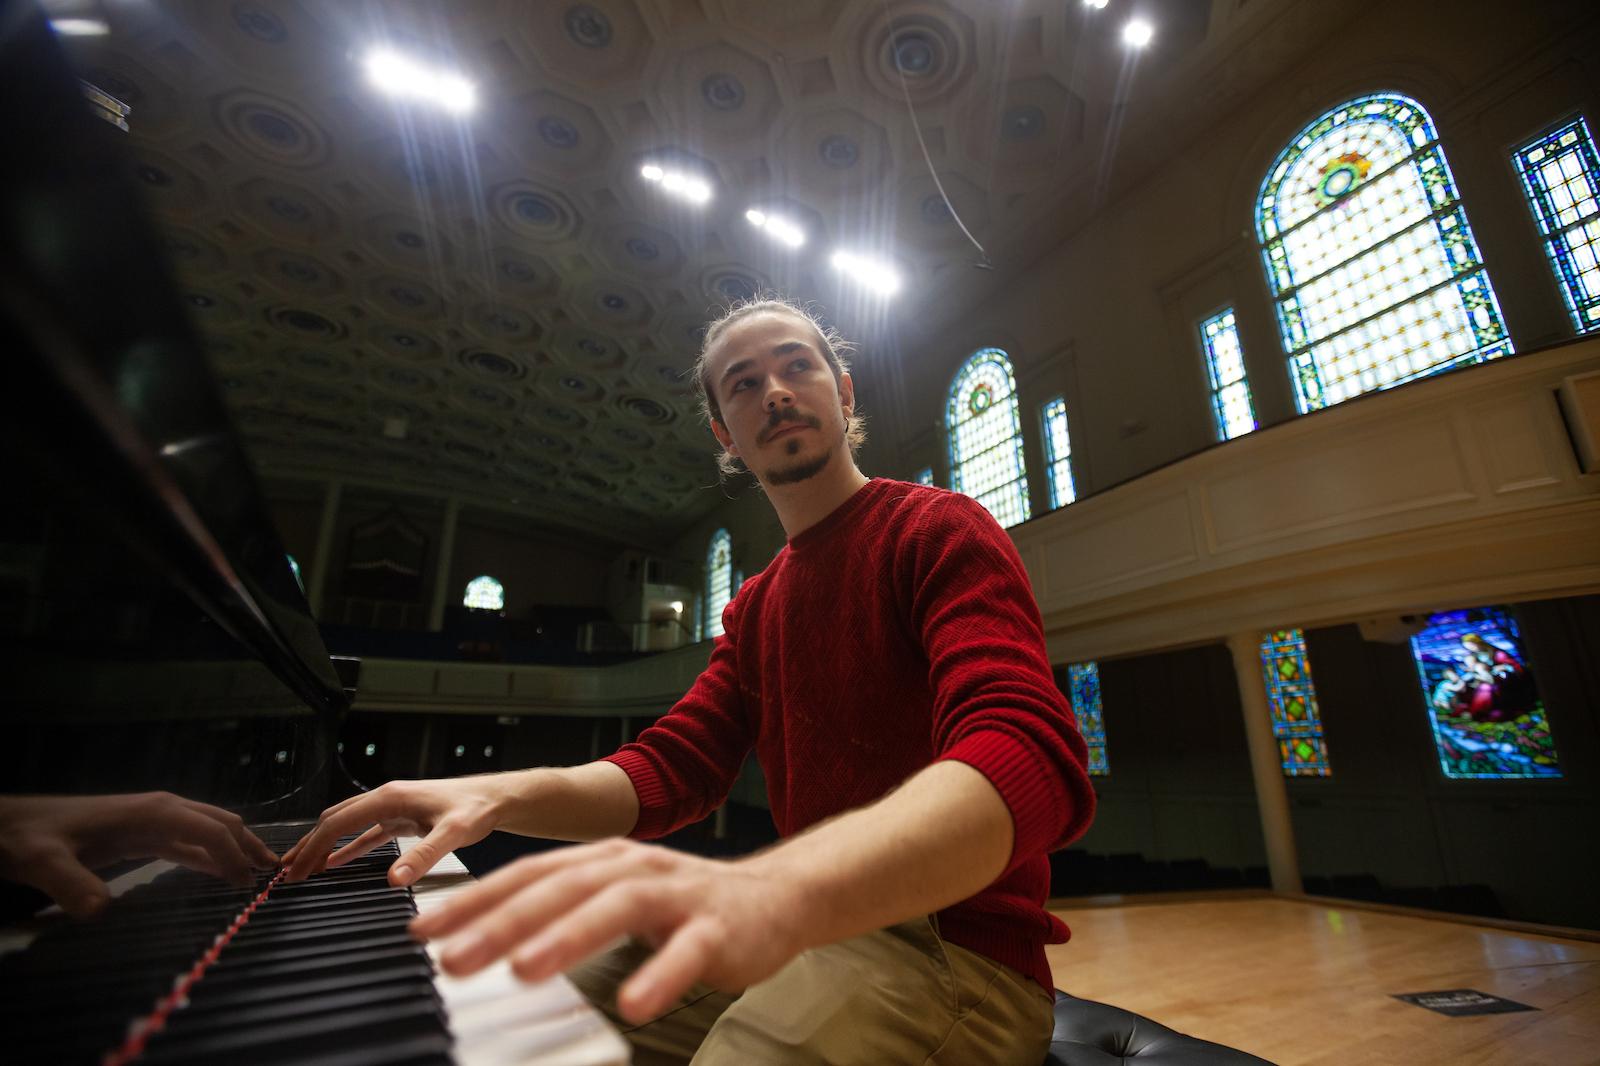 Bohdan Tataryn plays the piano with the Memorial Chapel windows in the background.